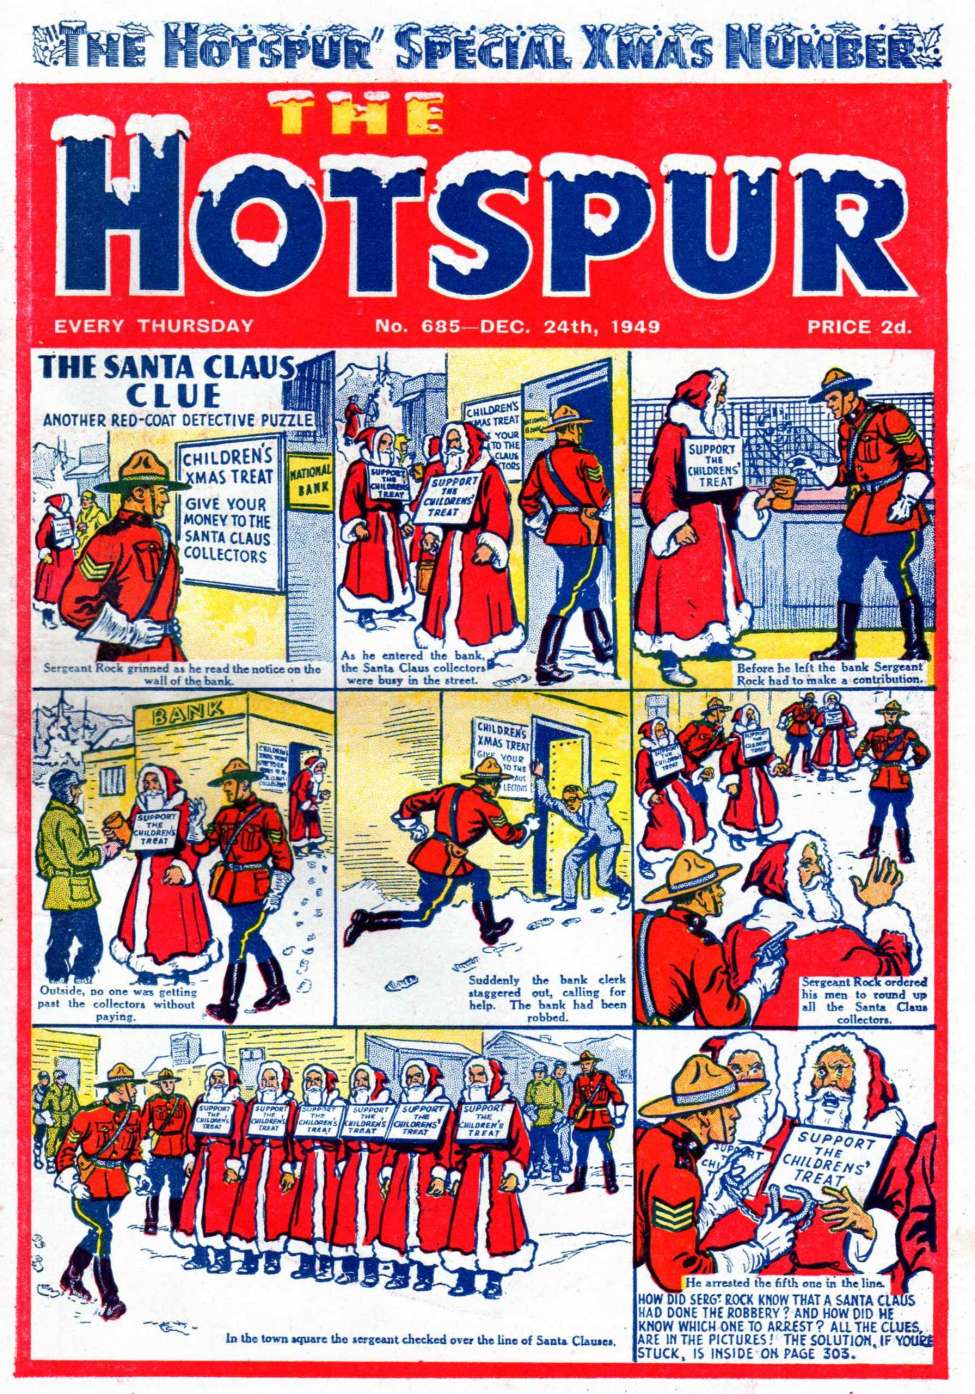 Book Cover For The Hotspur 685